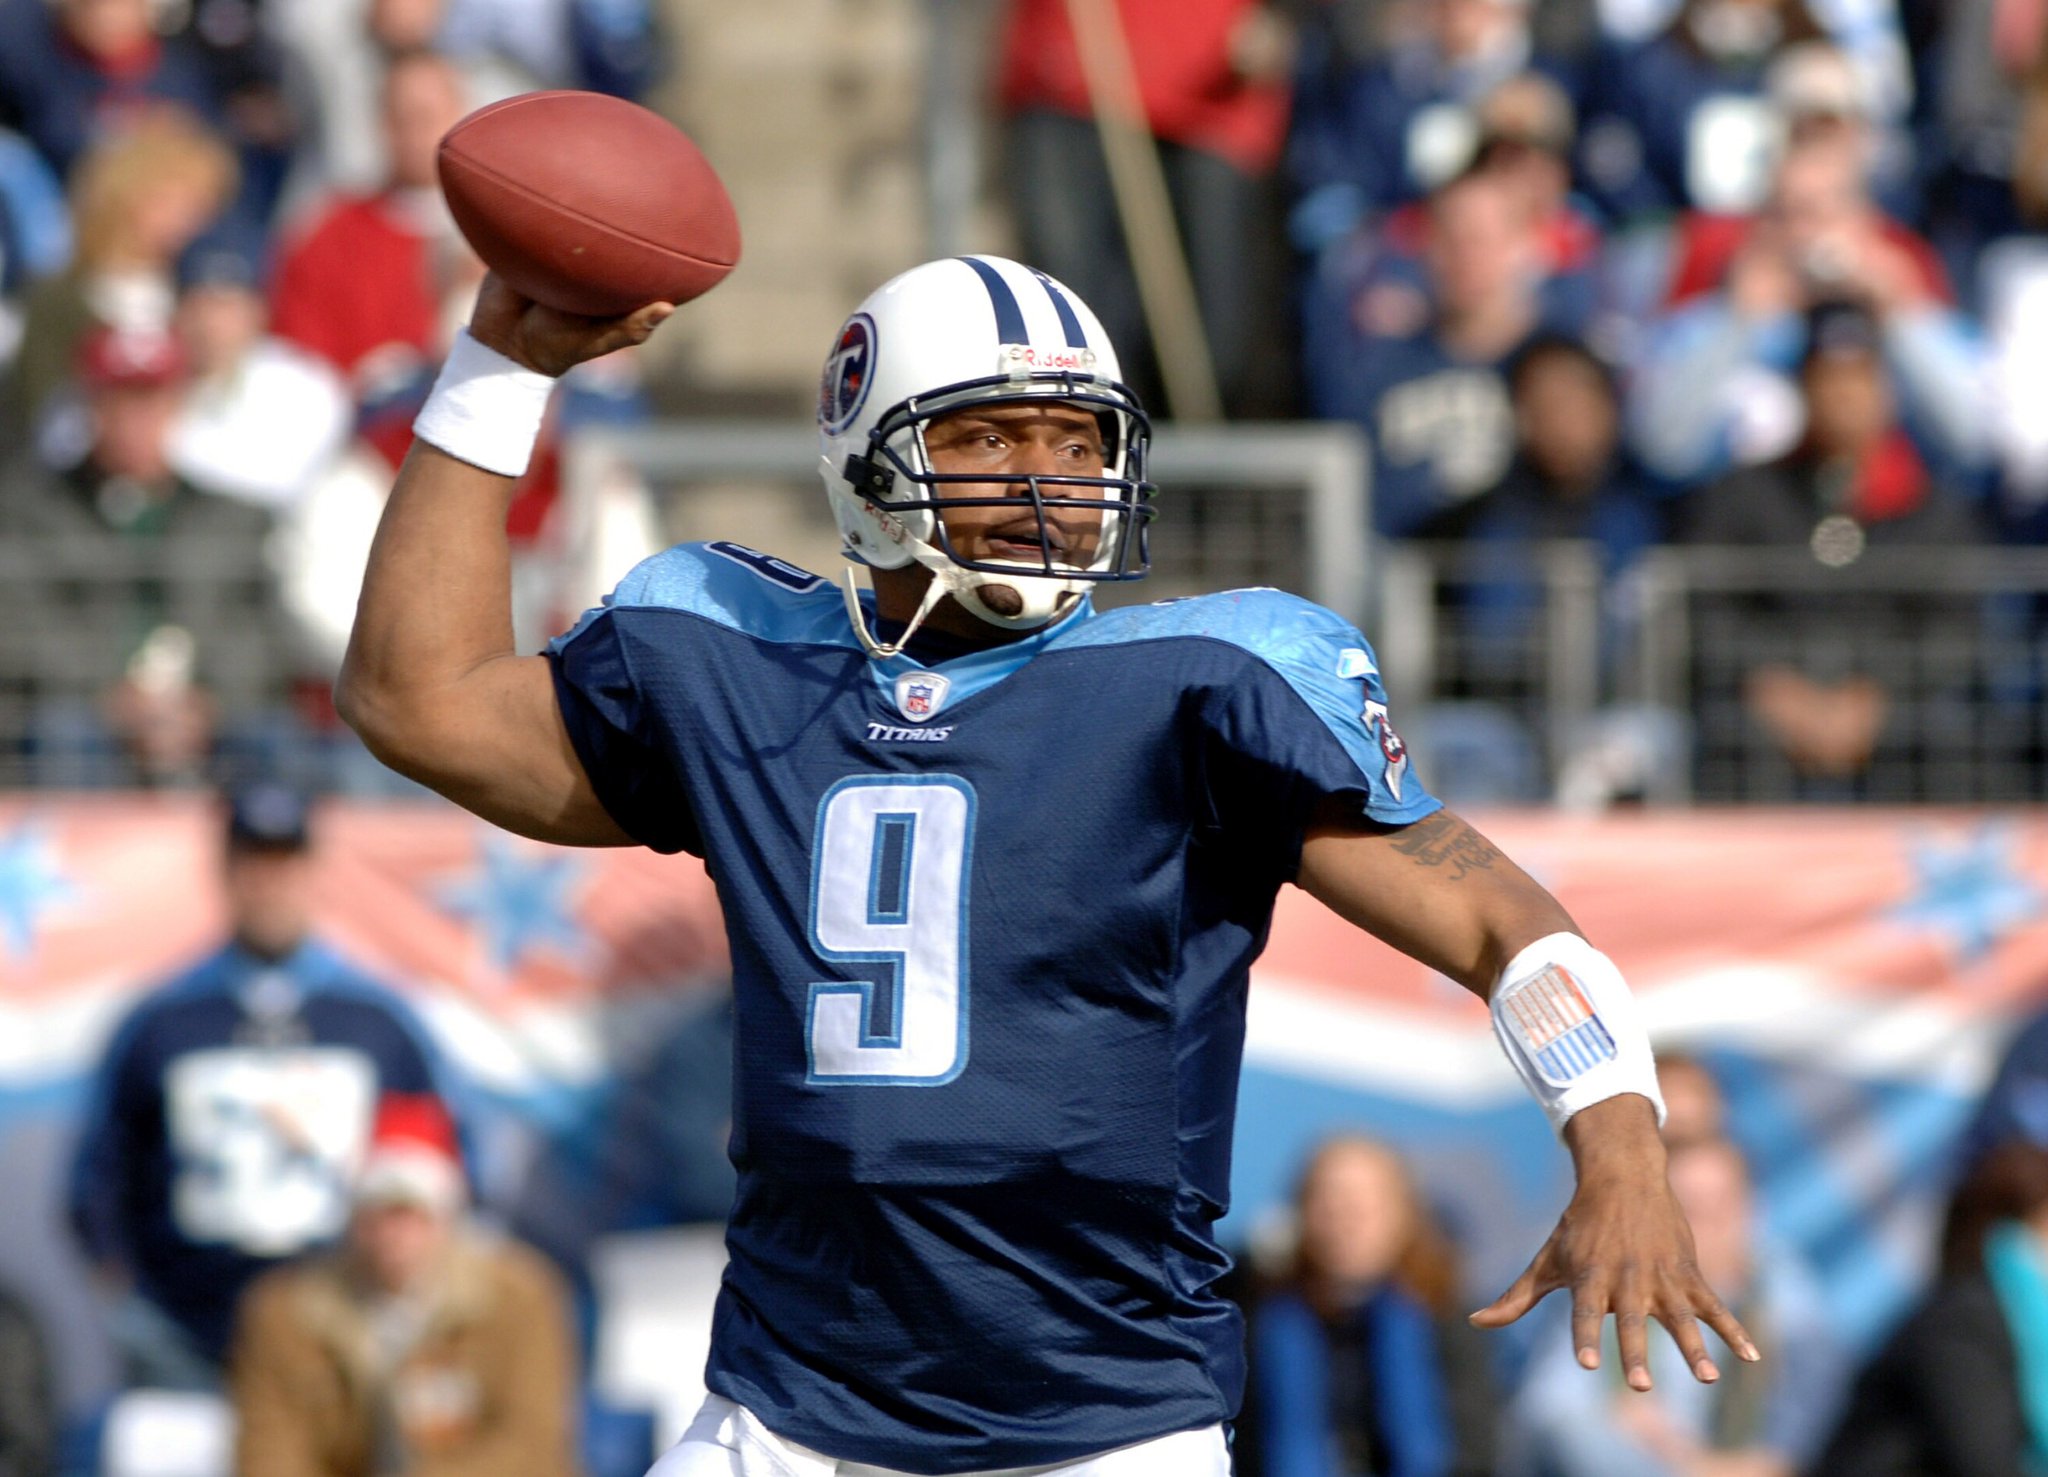 Happy Birthday to Steve McNair, who would have turned 45 today! 